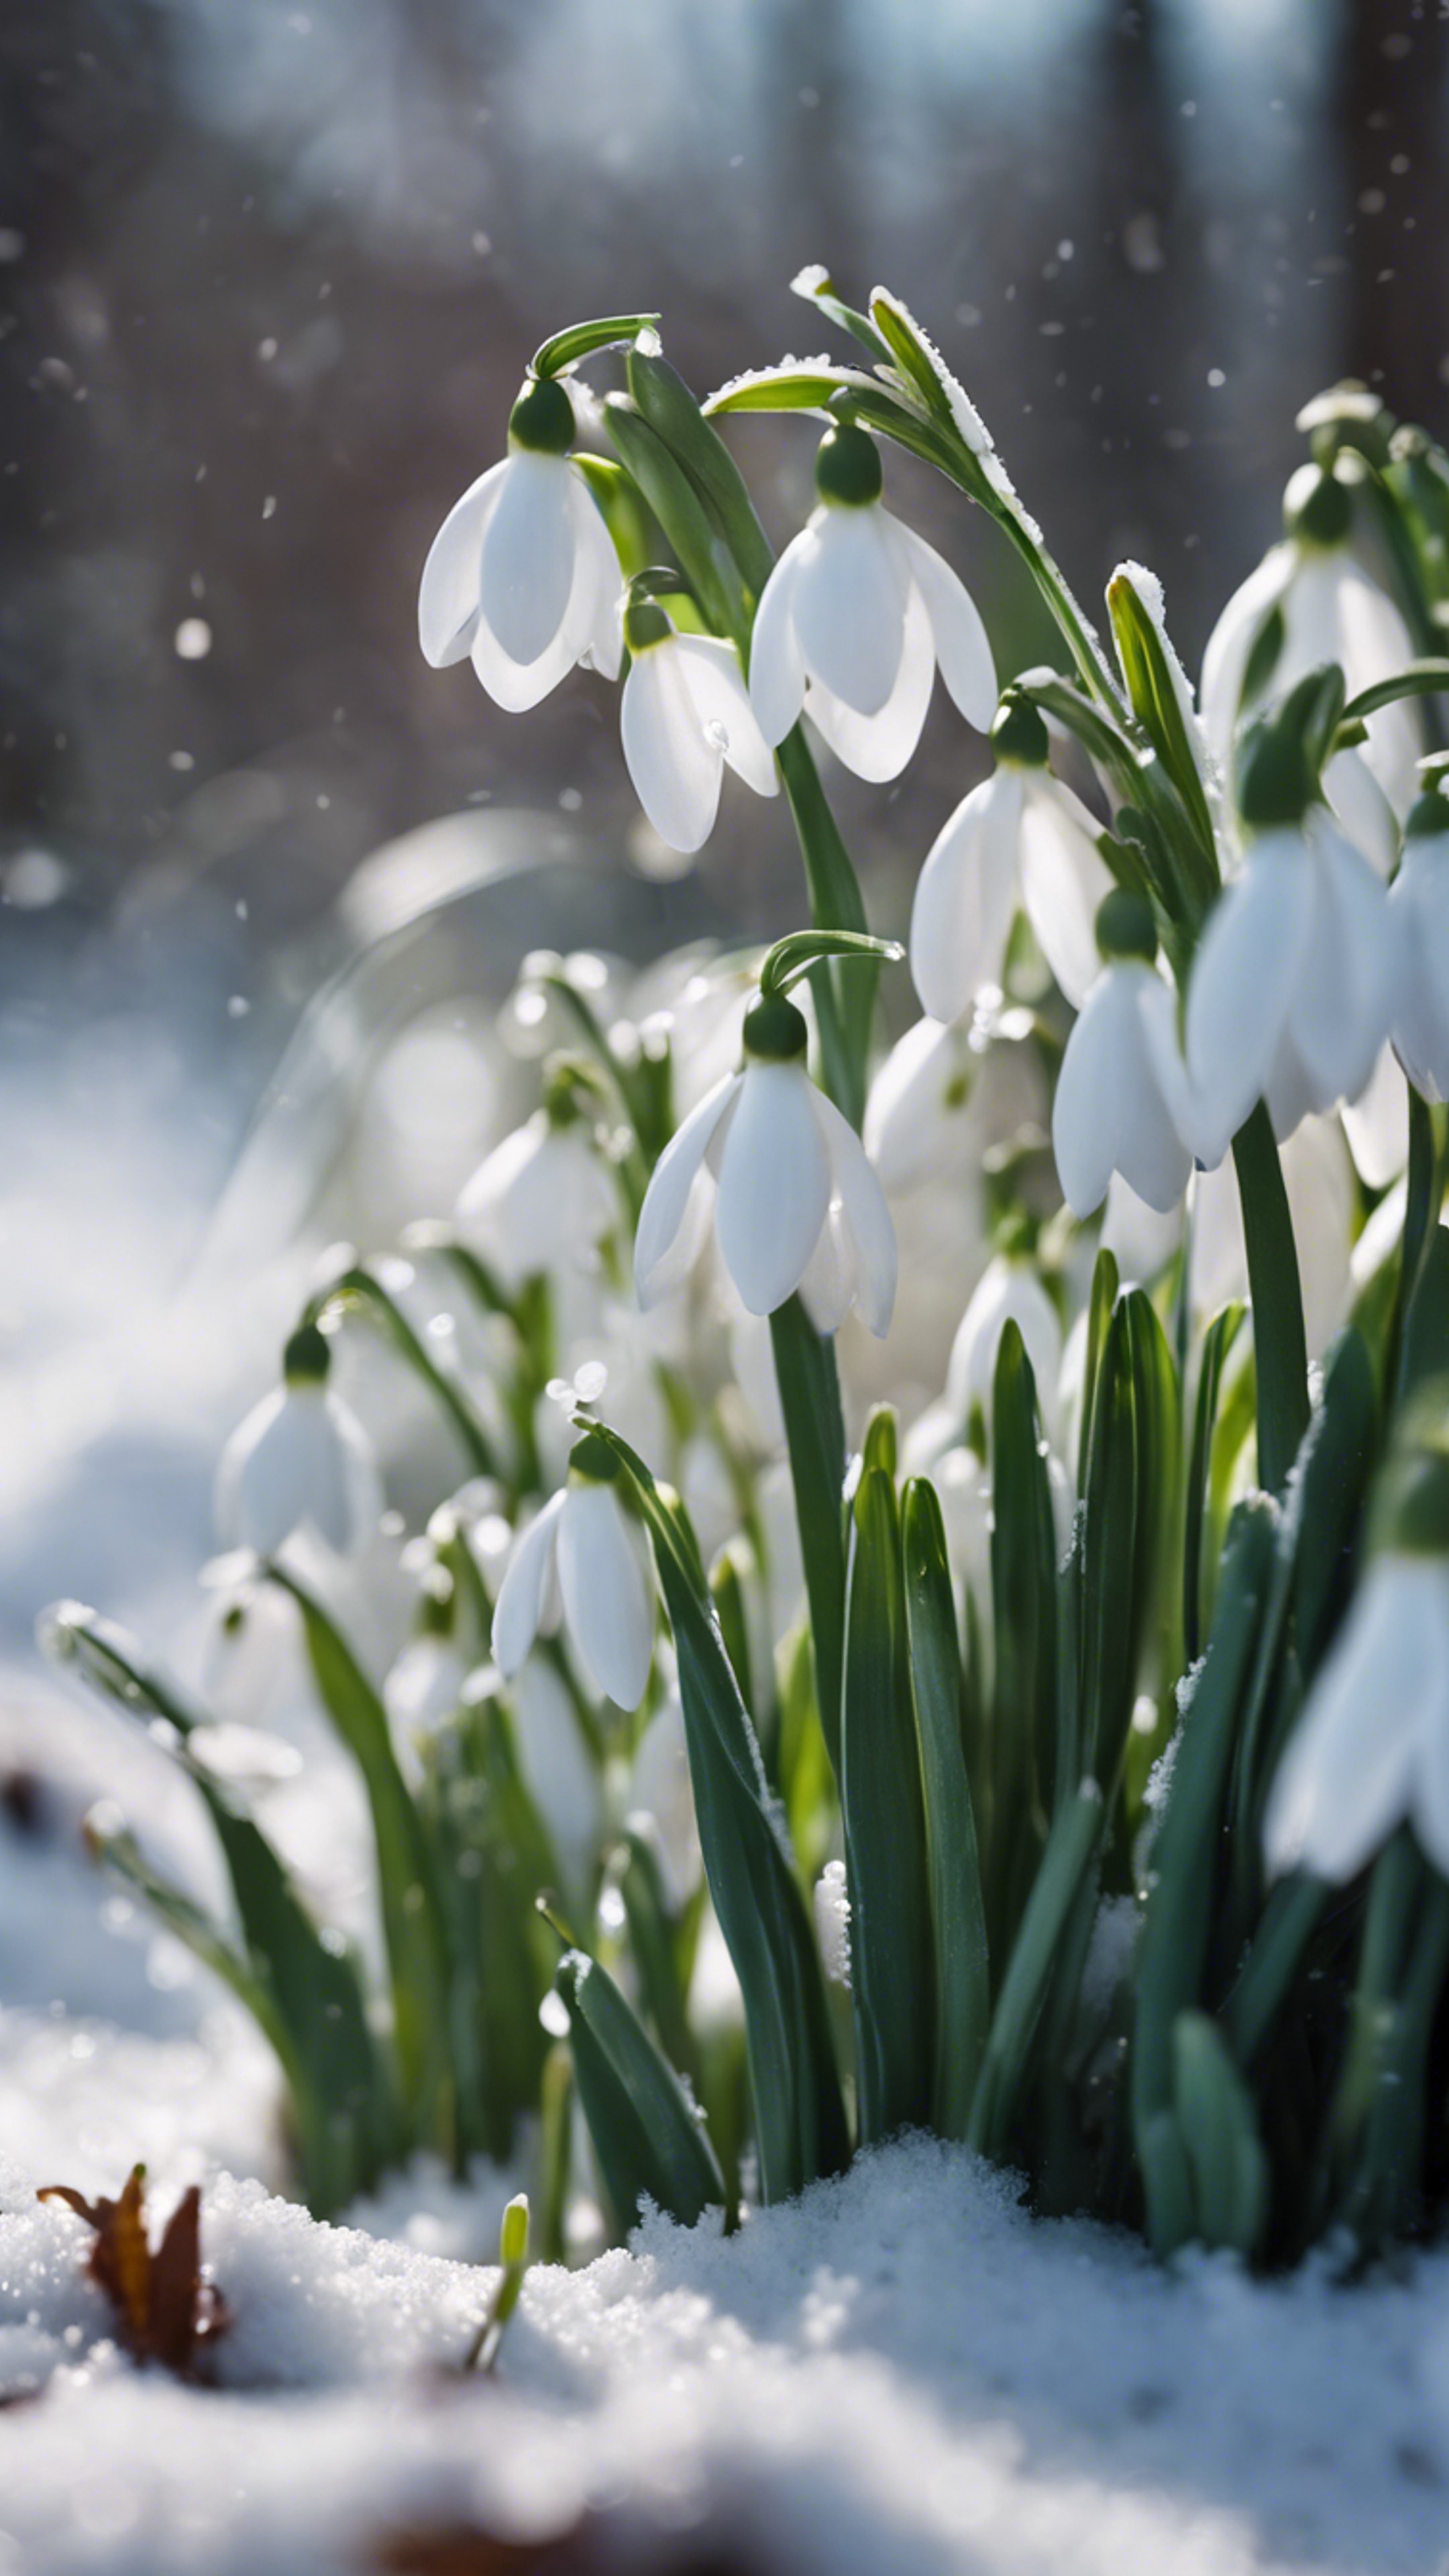 A patch of white snowdrops peeking through a dusting of late spring snow. Tapet[e64c535efd0a459c9840]